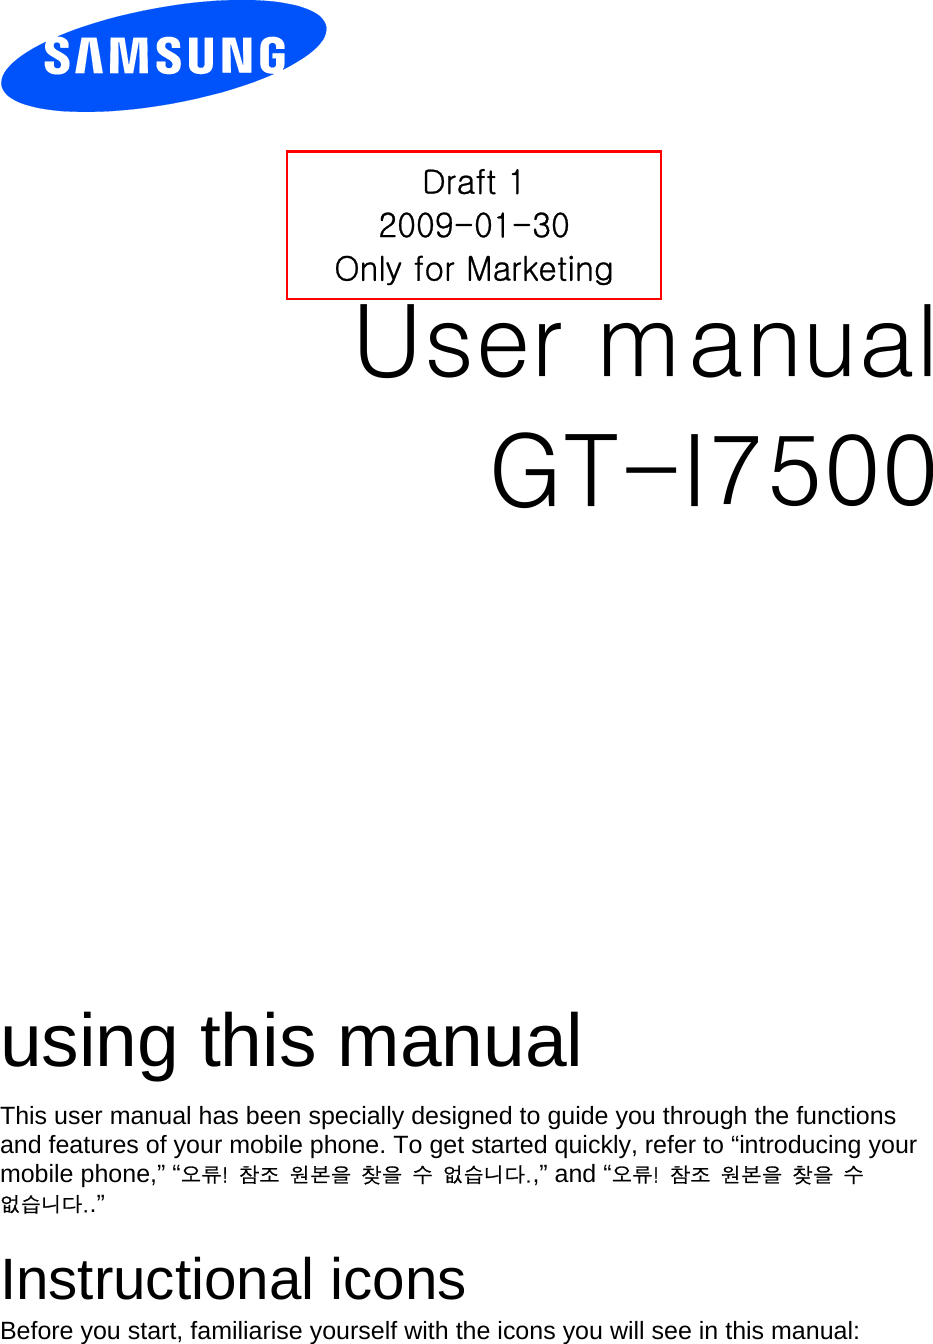          User manual GT-I7500                  using this manual This user manual has been specially designed to guide you through the functions and features of your mobile phone. To get started quickly, refer to “introducing your mobile phone,” “오류!  참조  원본을  찾을  수  없습니다.,” and “오류!  참조  원본을  찾을  수 없습니다..”  Instructional icons Before you start, familiarise yourself with the icons you will see in this manual:   Draft 1 2009-01-30 Only for Marketing 